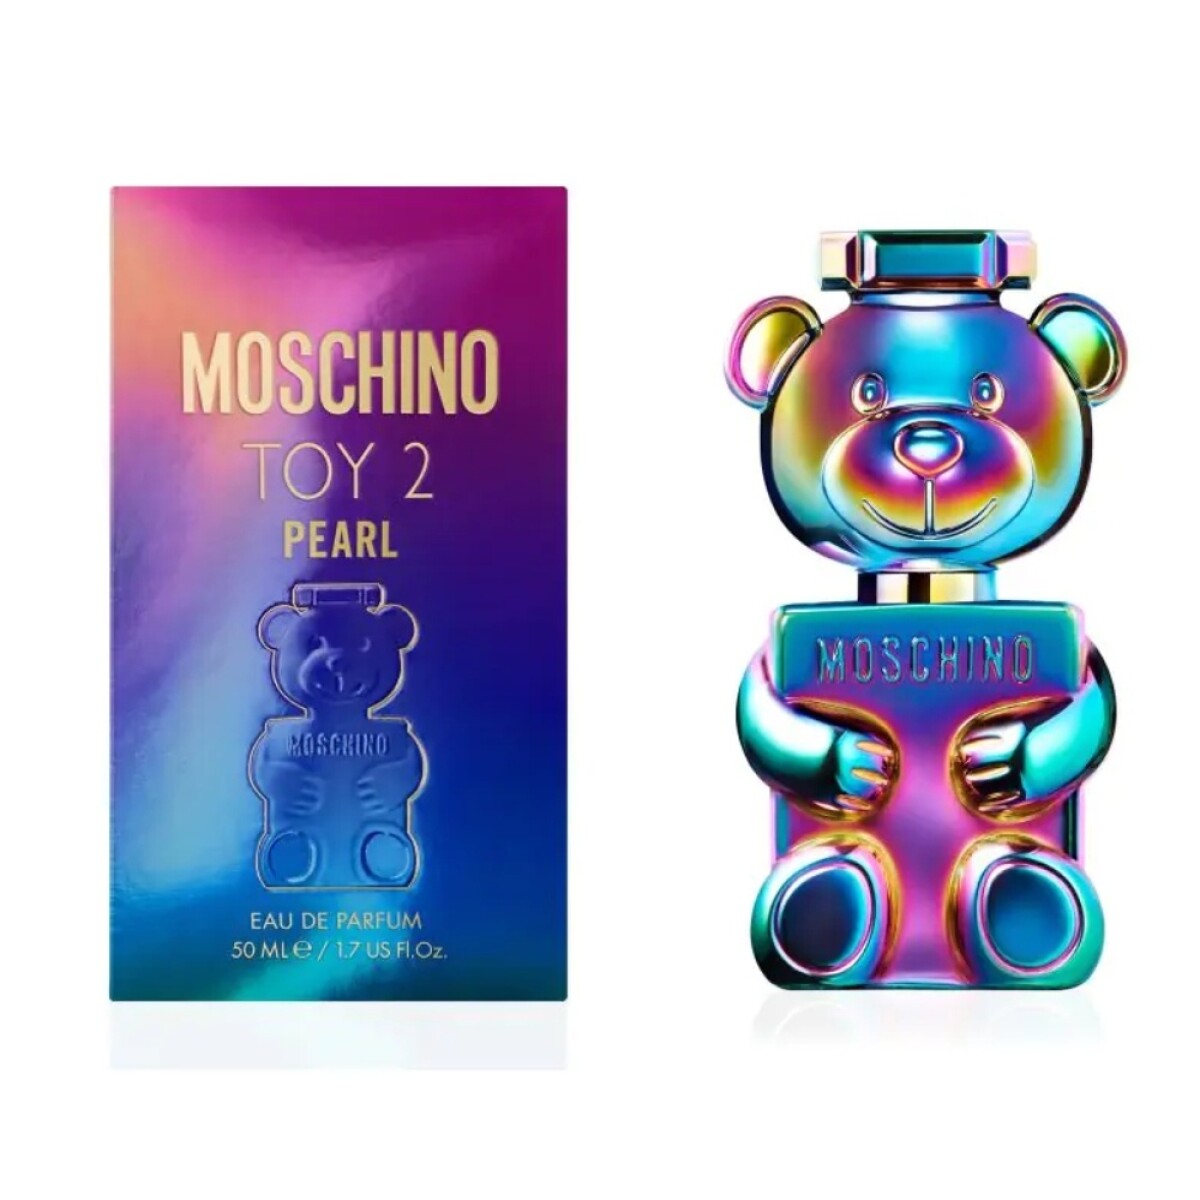 Perfume Moschino Toy2 Pearl Edt 50 Ml 